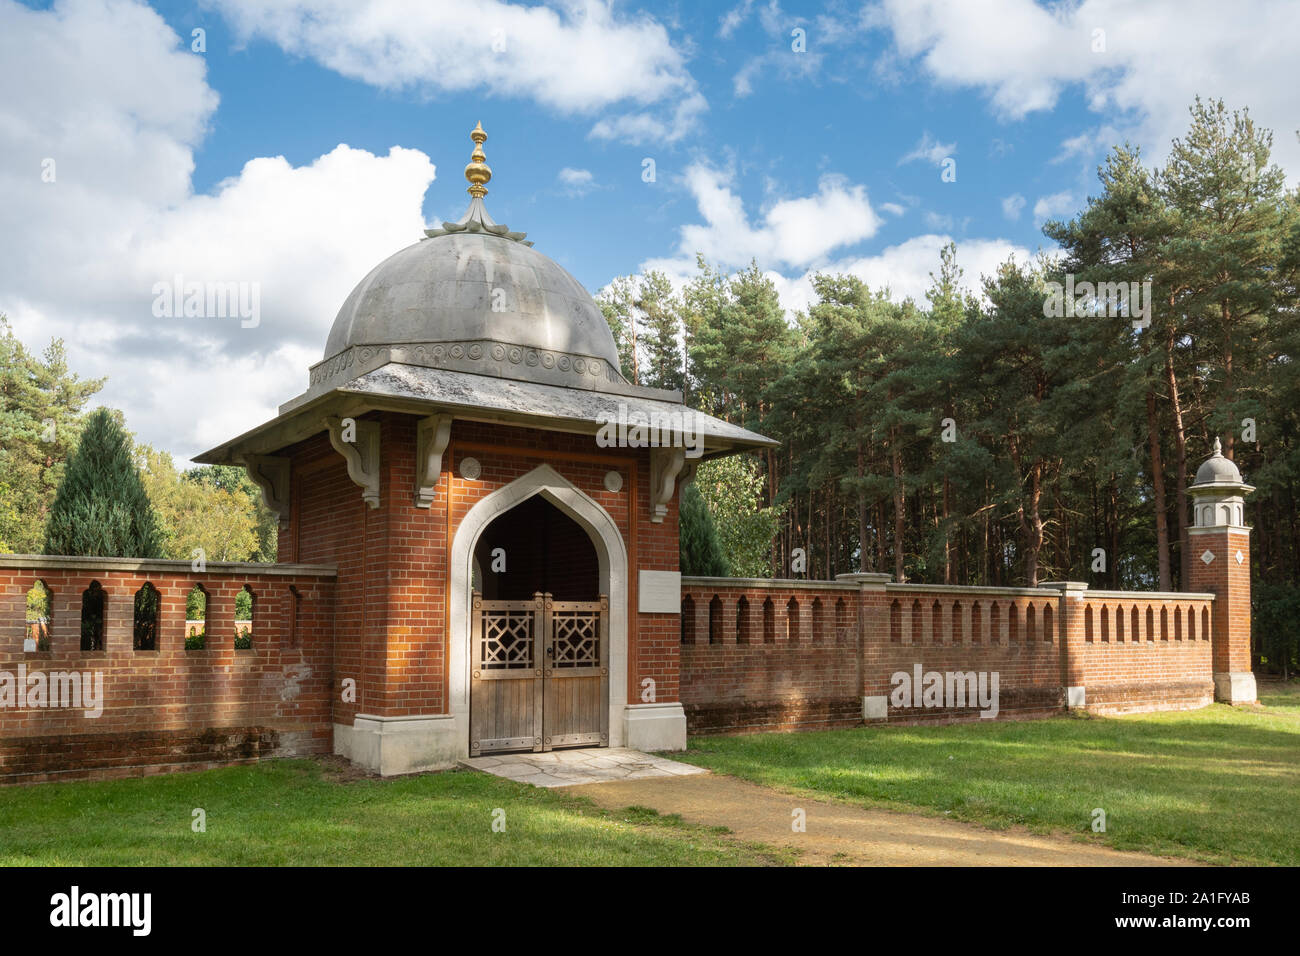 Woking Muslim Burial Ground and Peace Garden, historic war cemetery in Surrey, UK. Domed archway over entrance and ornate walls. Stock Photo